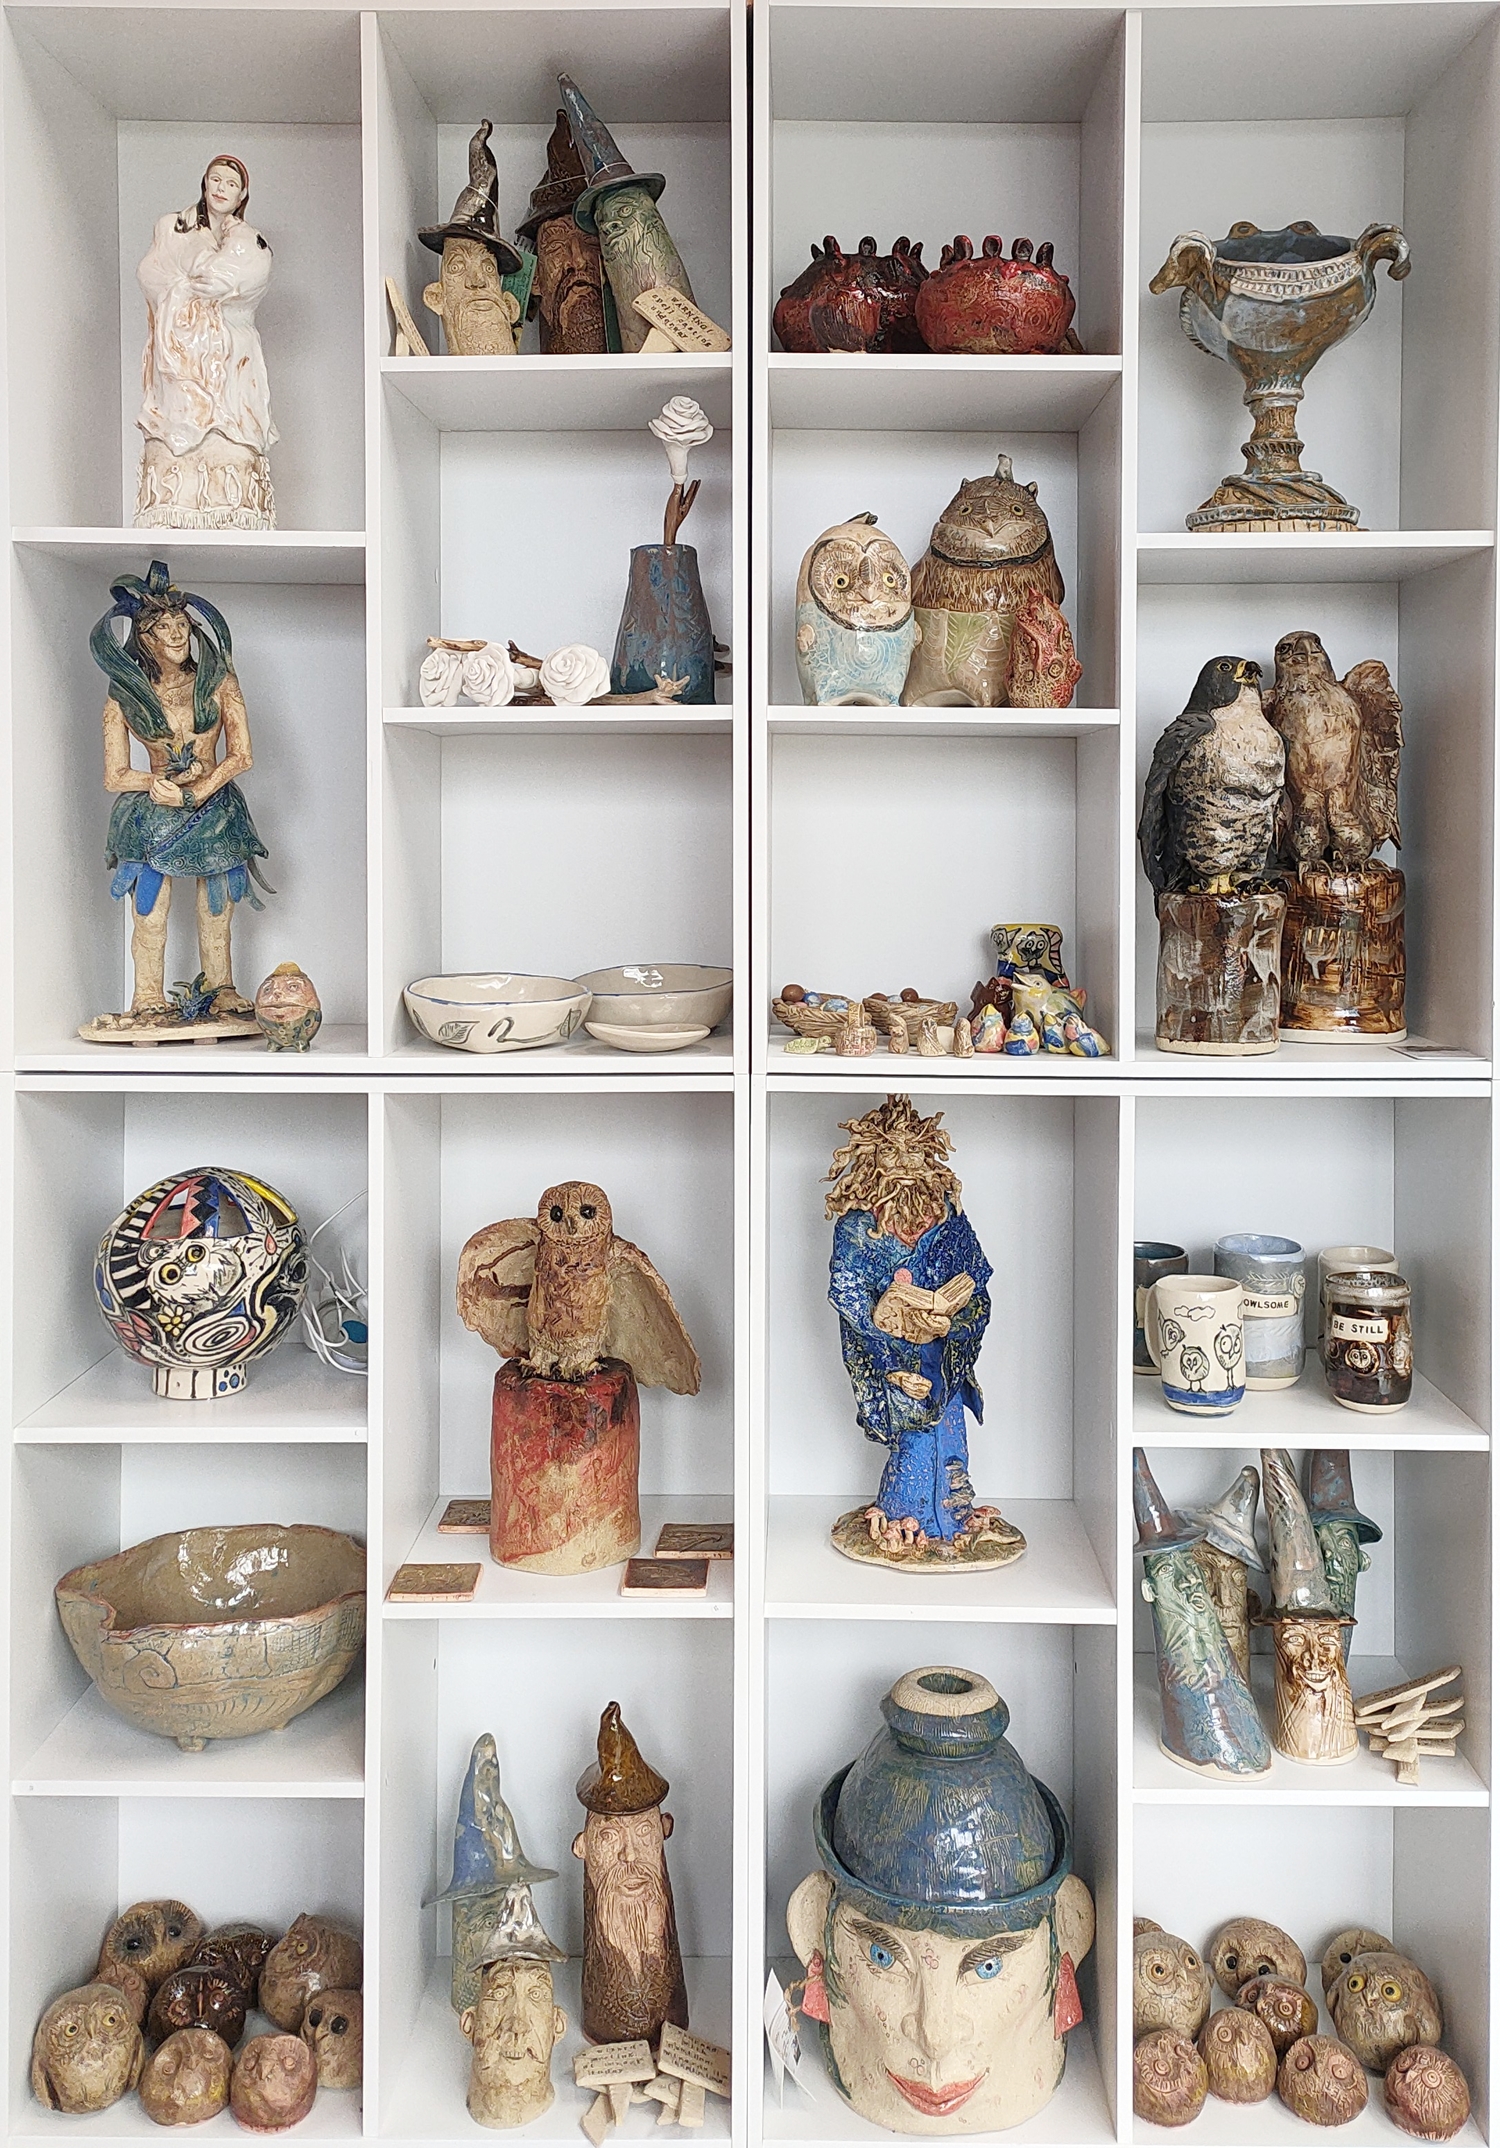 Image shows a wall shelving unit displaying beautifully crafted ceramic sculptures at Lee-Anne Peters Ceramics studio Art Trails Tasmania